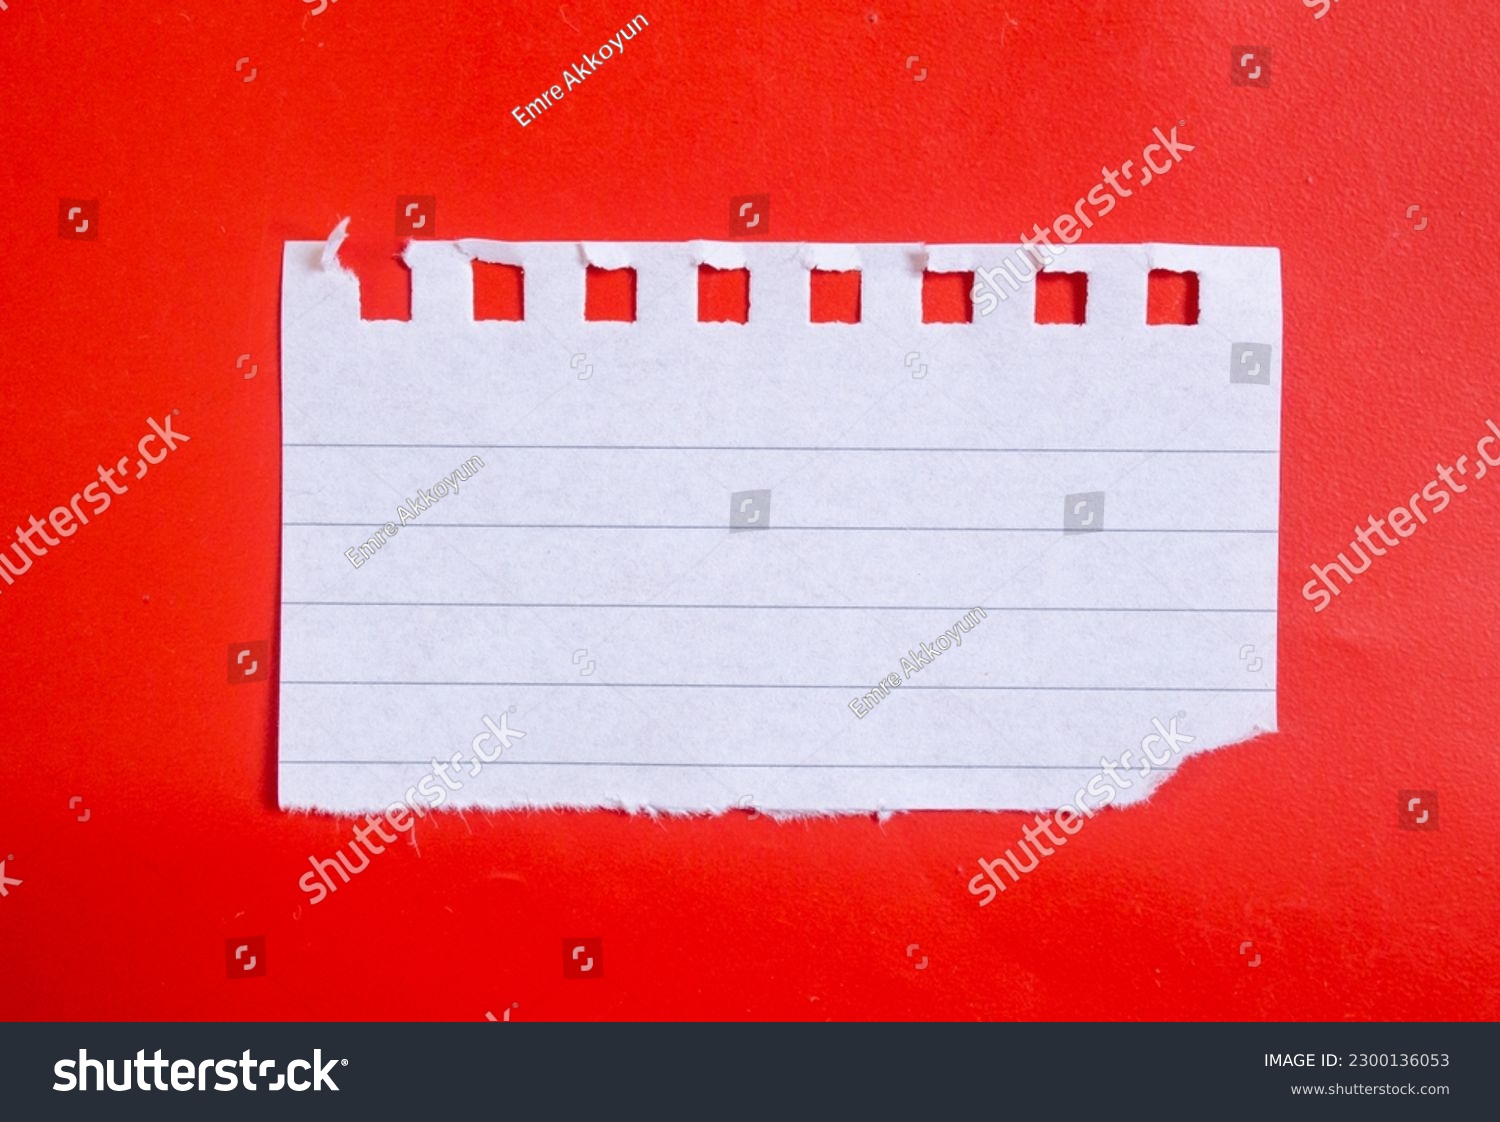 Ripped lined notebook paper on red background with copy space. #2300136053